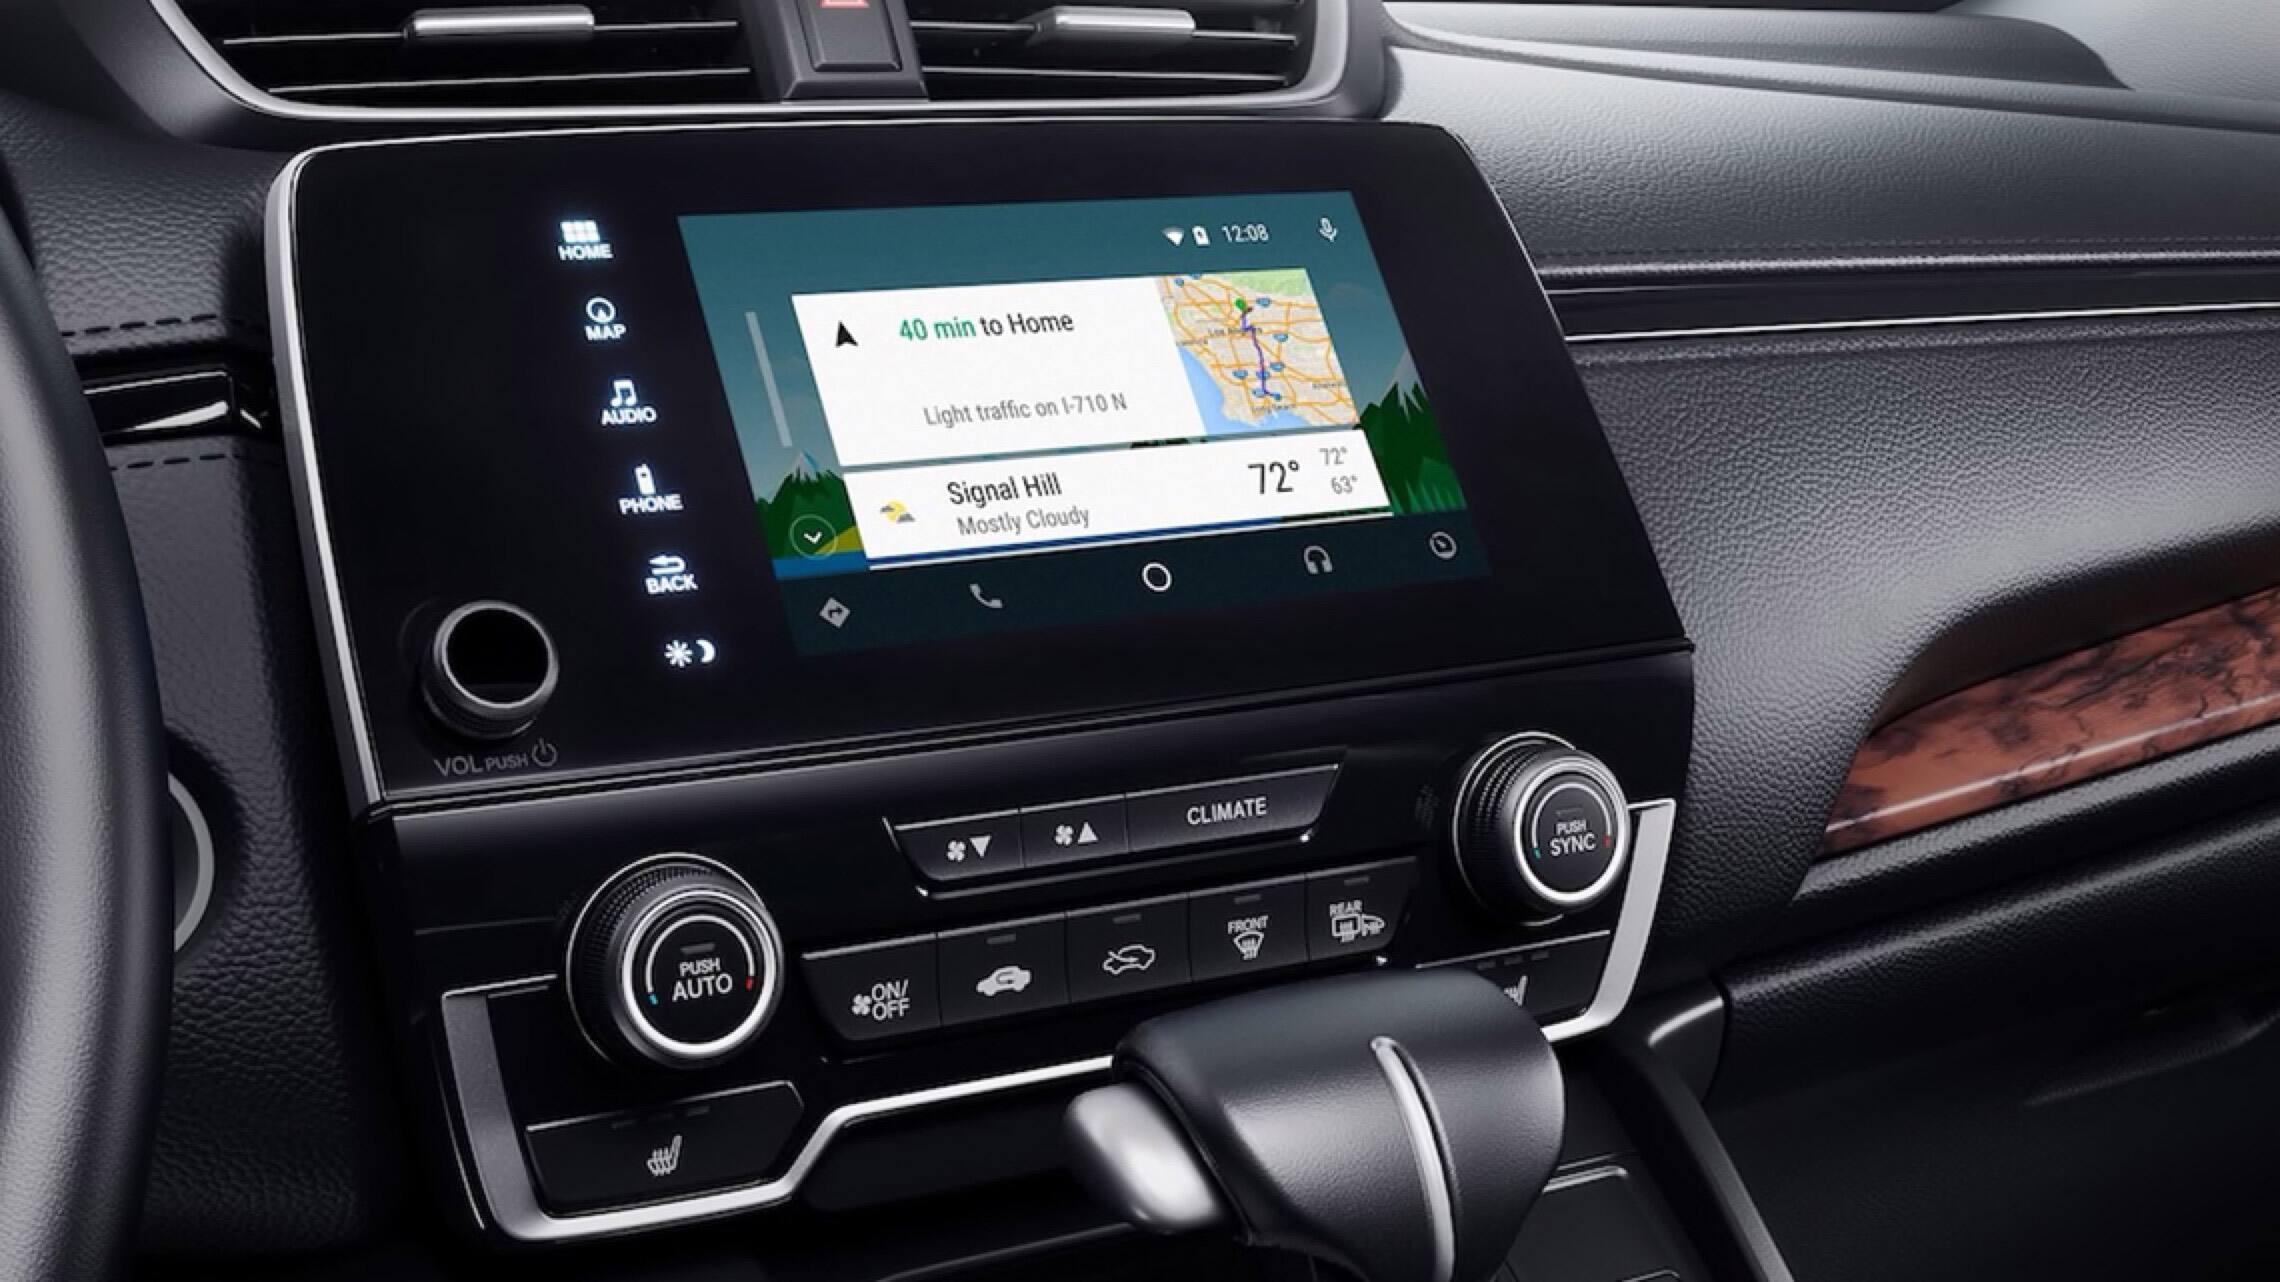 Display Audio touch-screen with Android Auto™ integration menu in the 2019 Honda CR-V.